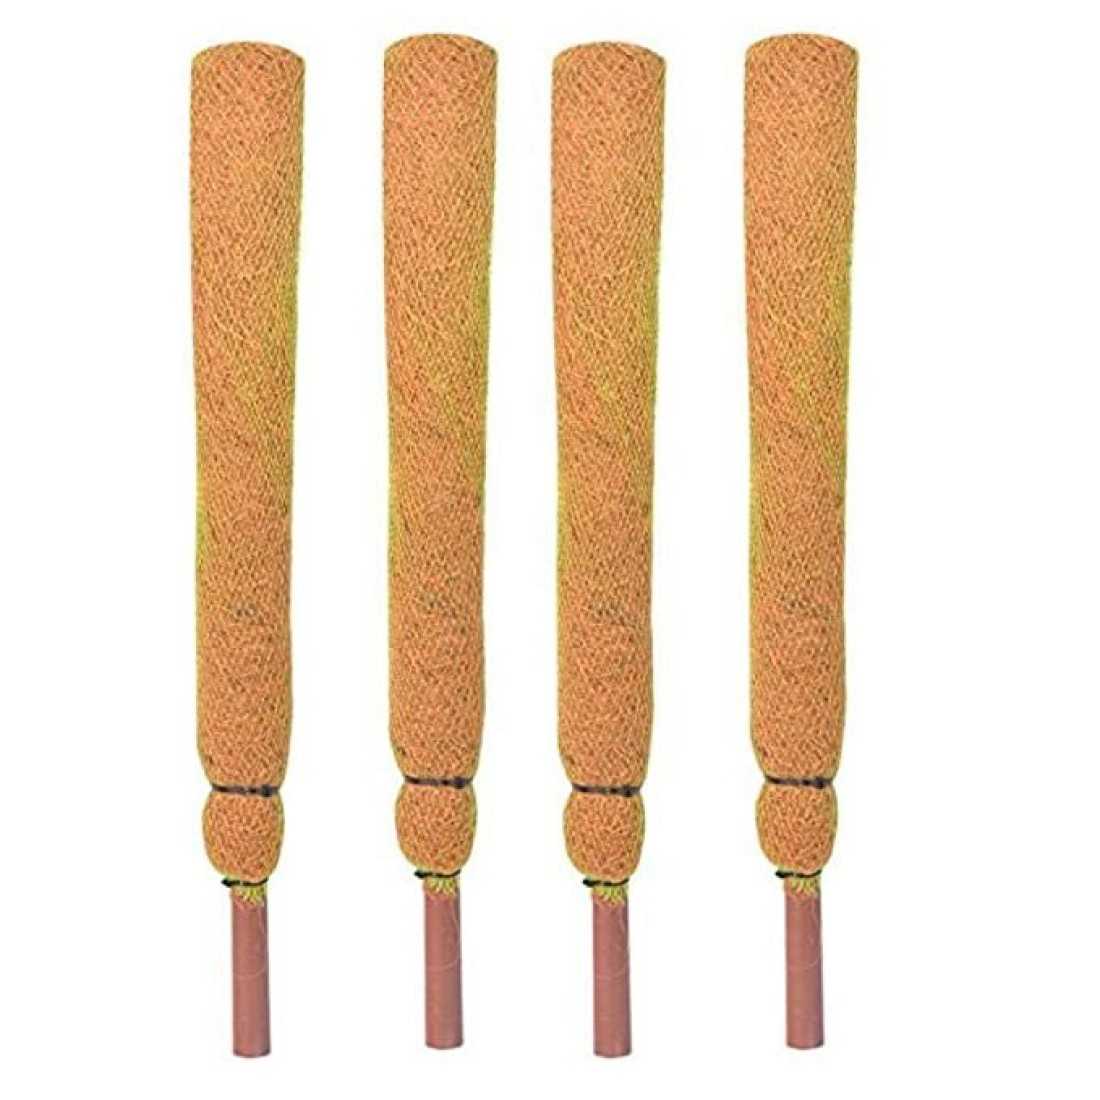 Coco Pole 4 Feet (120 cm) Moss & Coir Stick for Money Plant Support, Indoor Plants, House Plants & Plant Creepers-set of 4 2